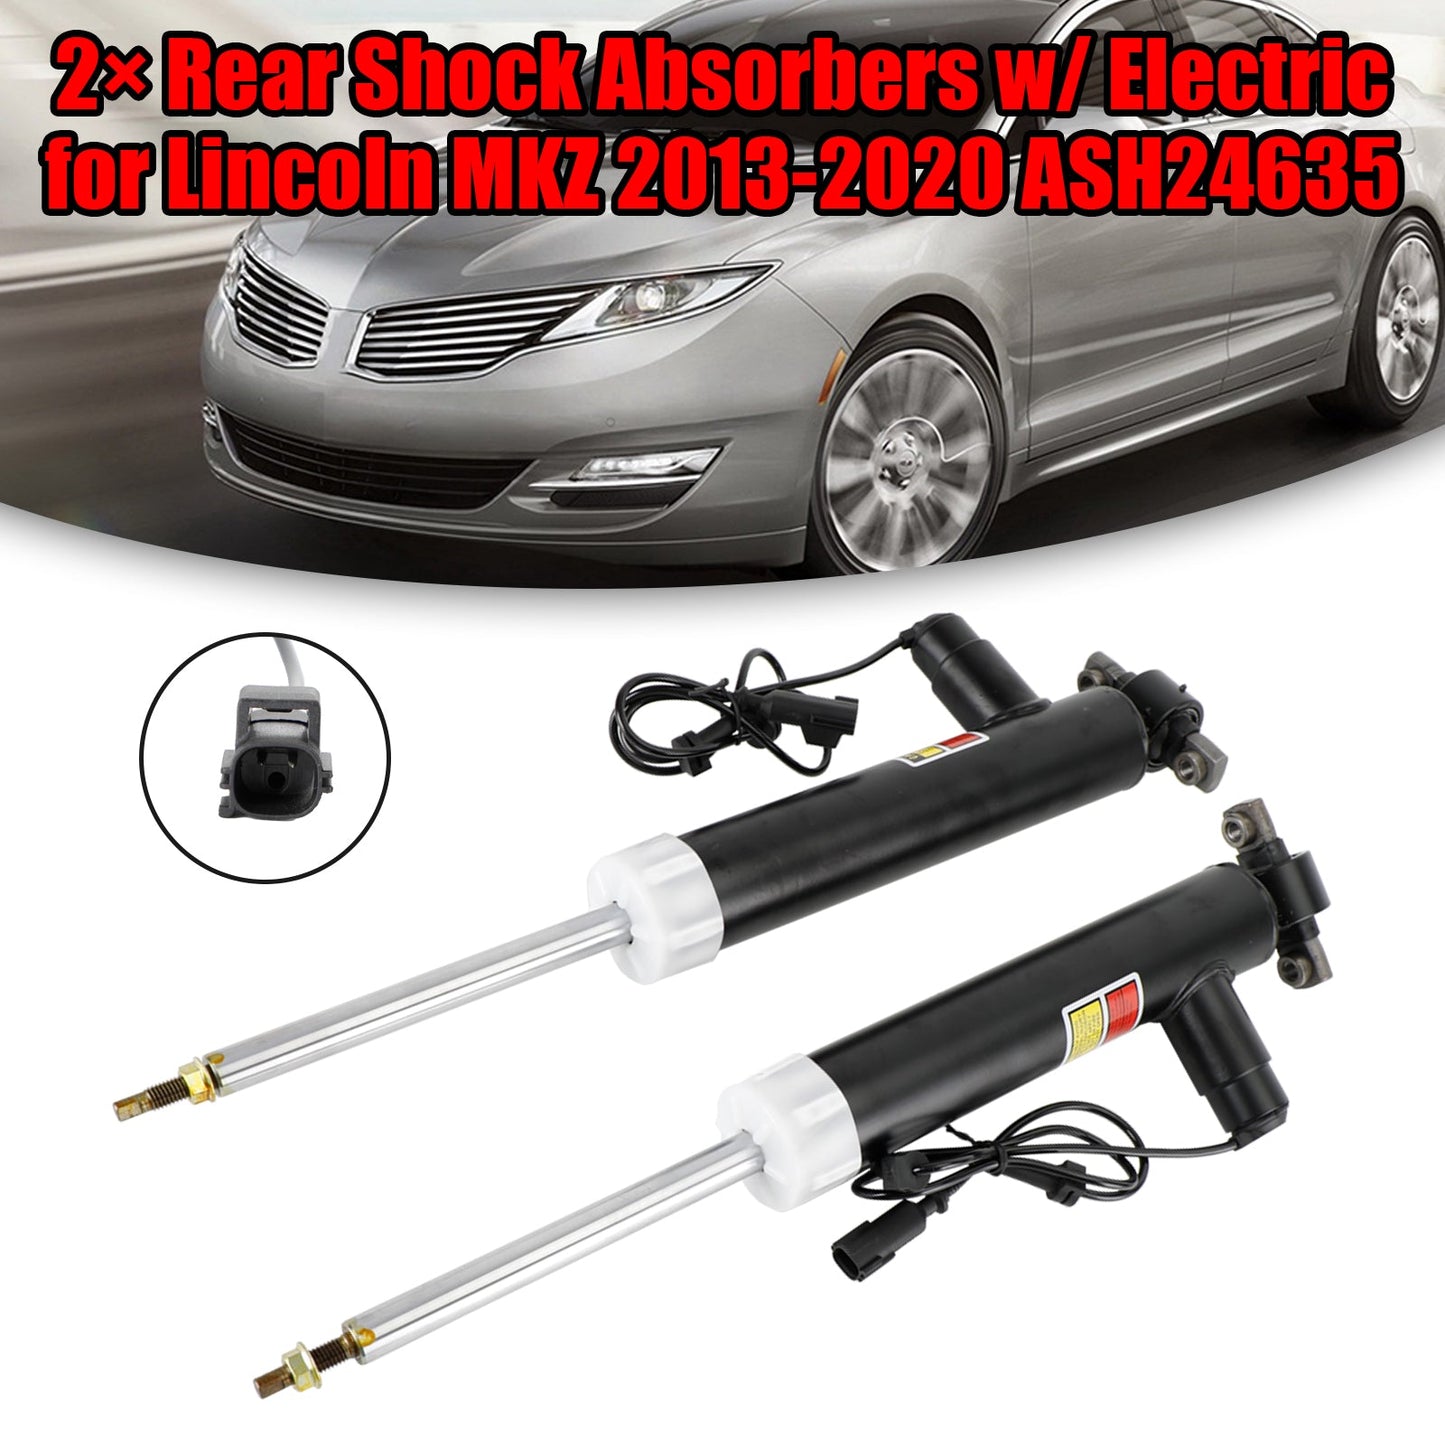 2× Rear Shock Absorbers w/ Electric for Lincoln MKZ 2013-2020 ASH24635